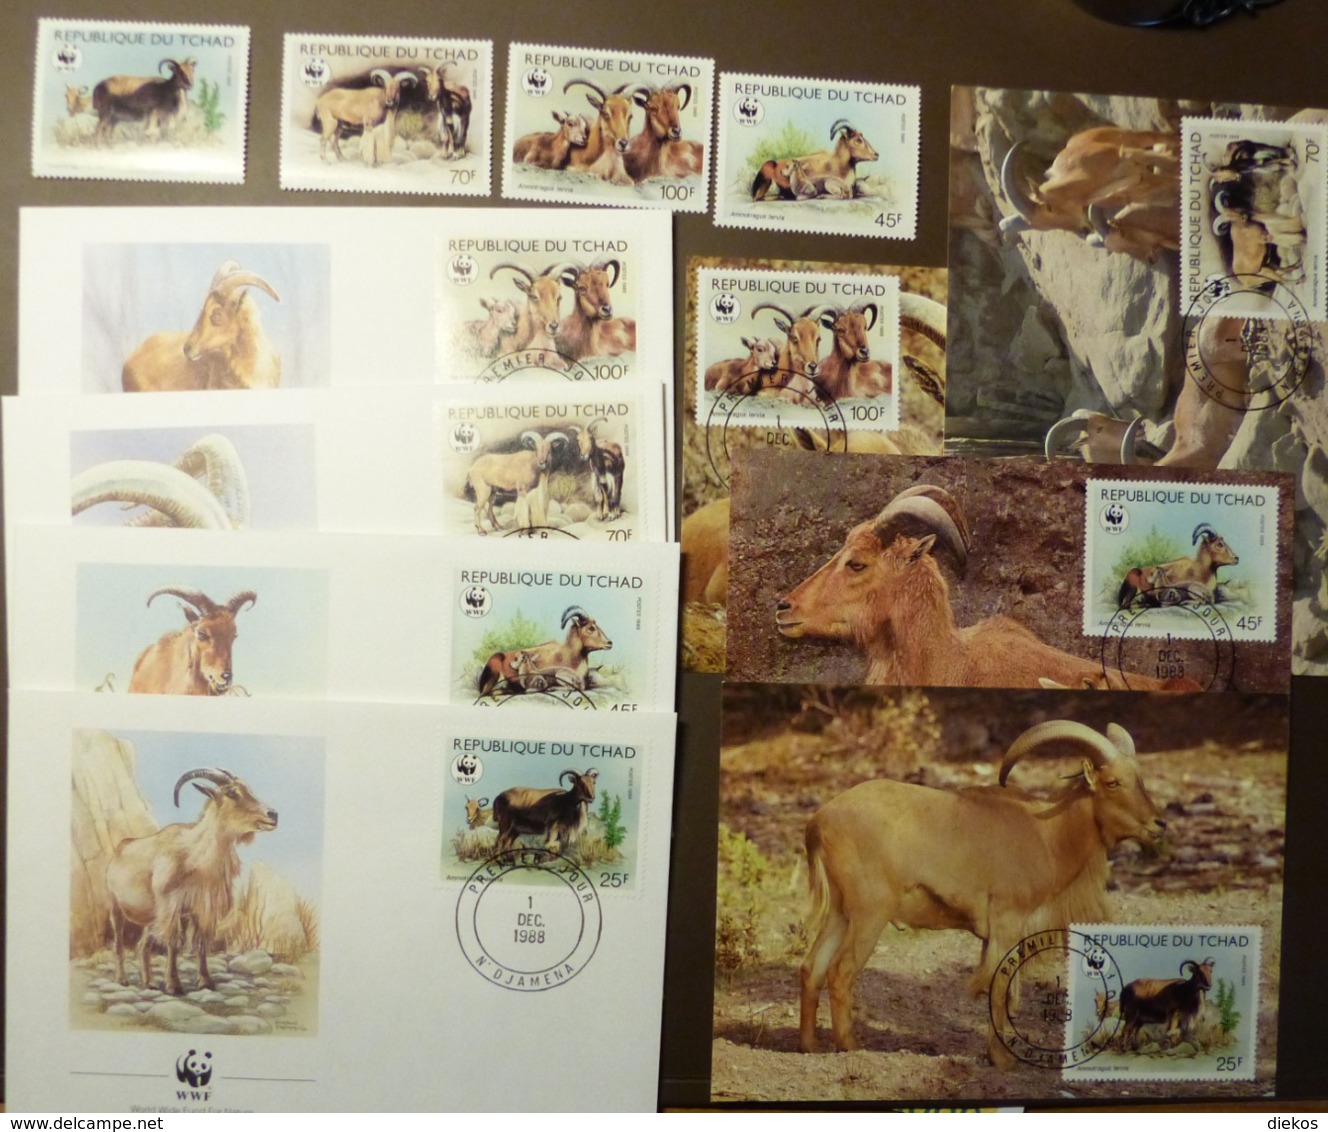 WWF Chad Tchad Tschad Barbary Sheep Goat Mähnenspringer Mouflons 1988 Maxi Card FDC MNH ** #cover 4937 - Collections, Lots & Séries